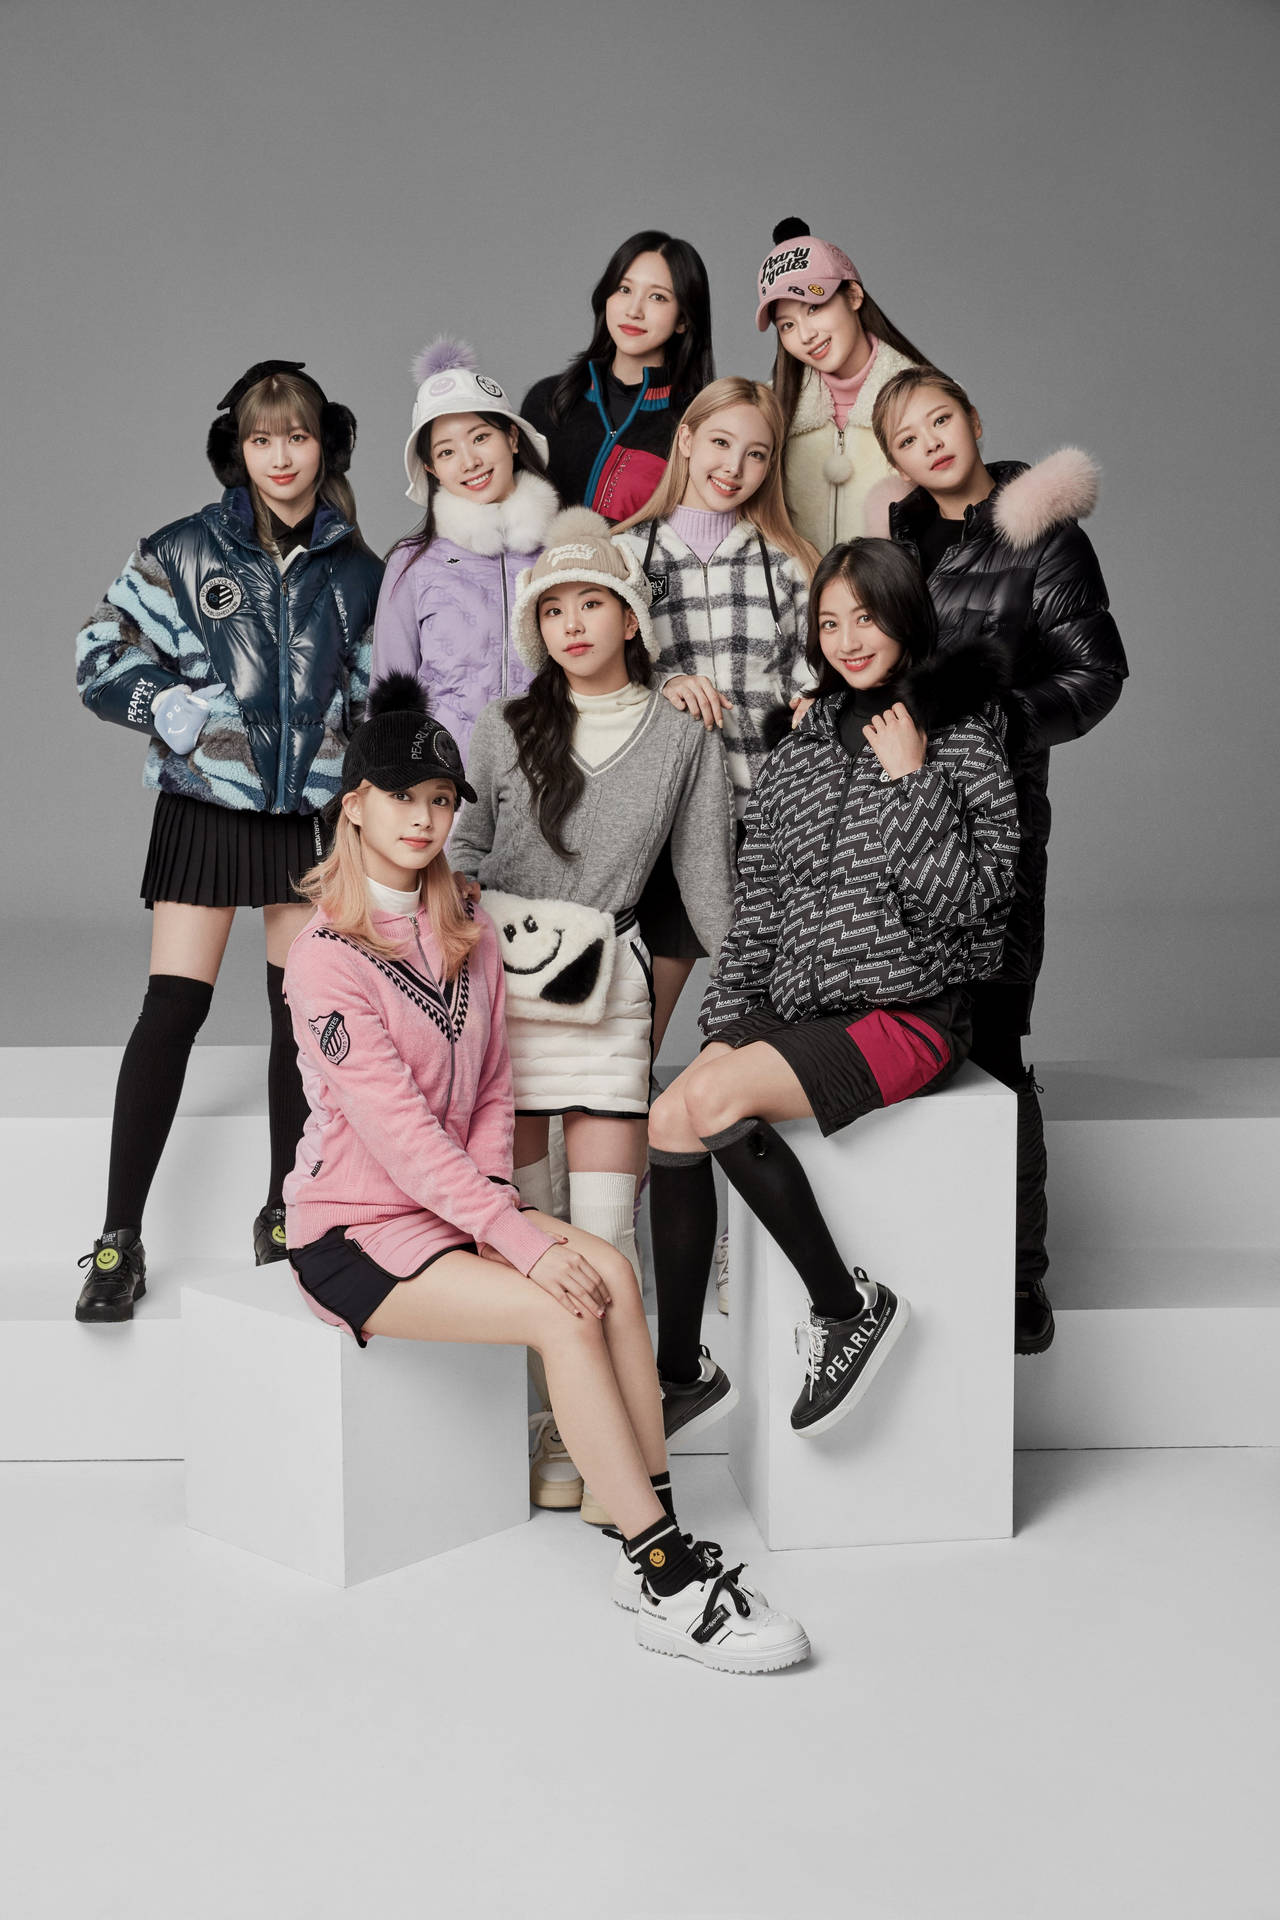 Twice 4K In Winter Clothes Wallpaper